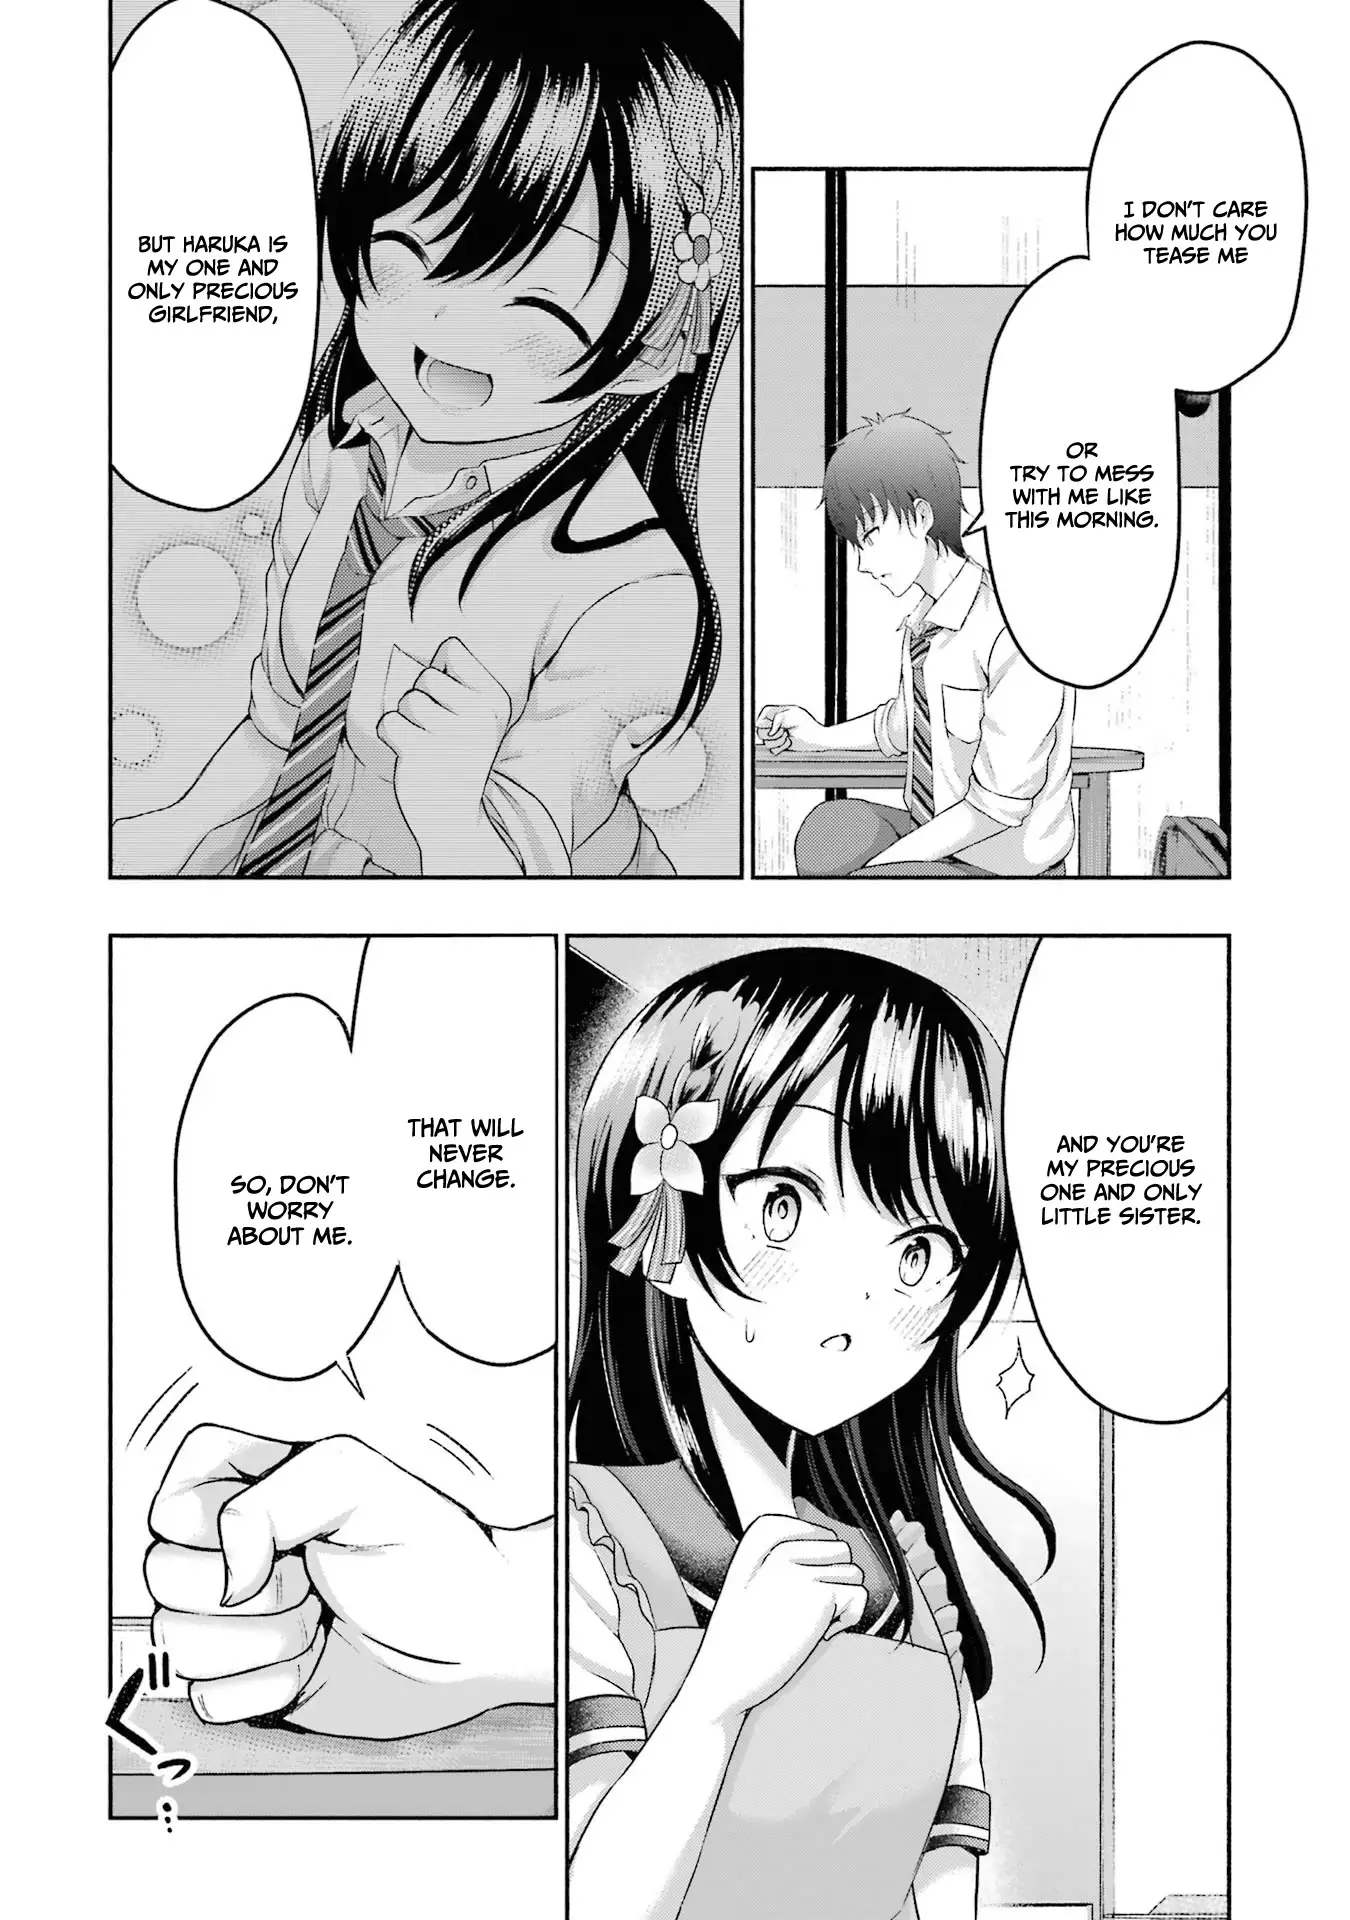 I Kissed My Girlfriend's Little Sister ♥ - 5 page 19-2c40a952